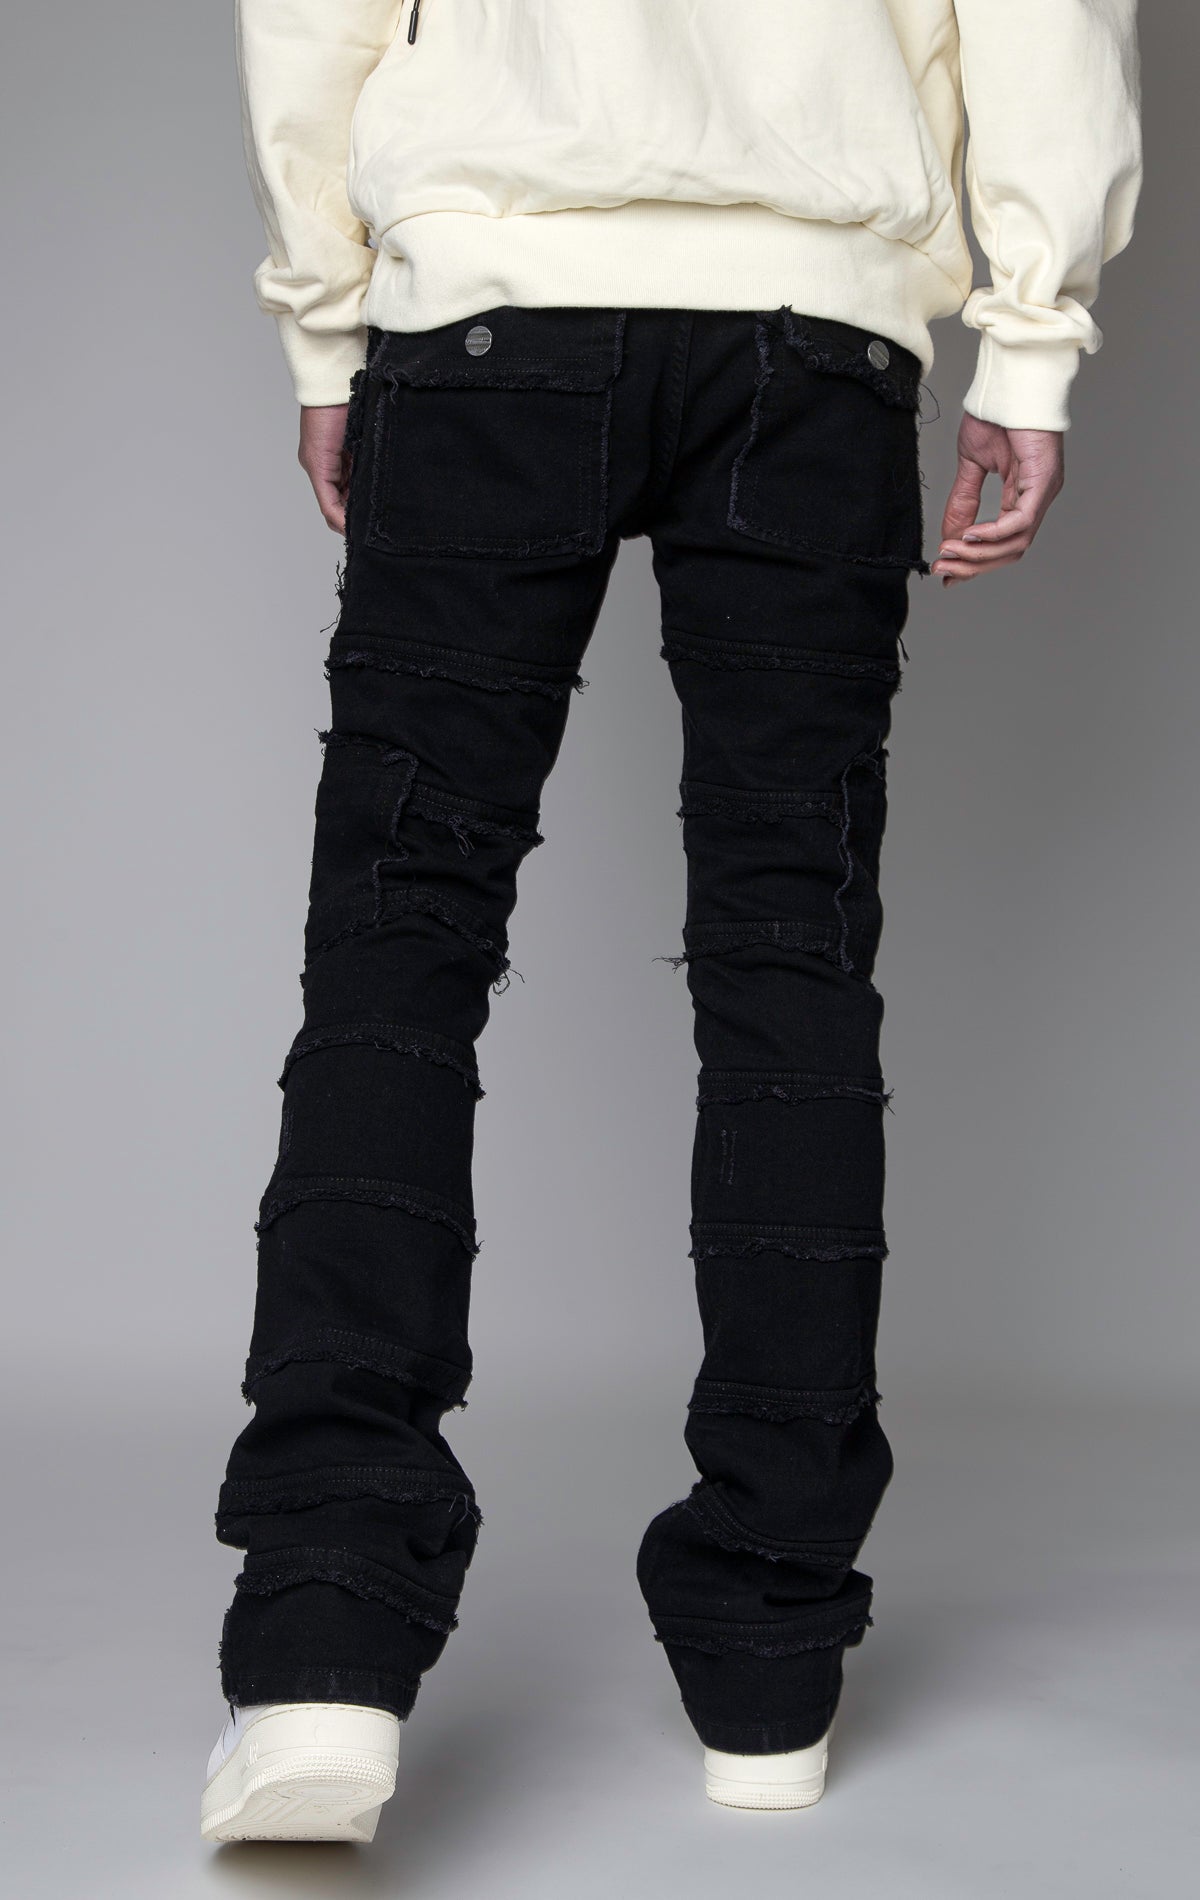 ice blue Stacked denim pants, distressed and paneled with a raw finishing